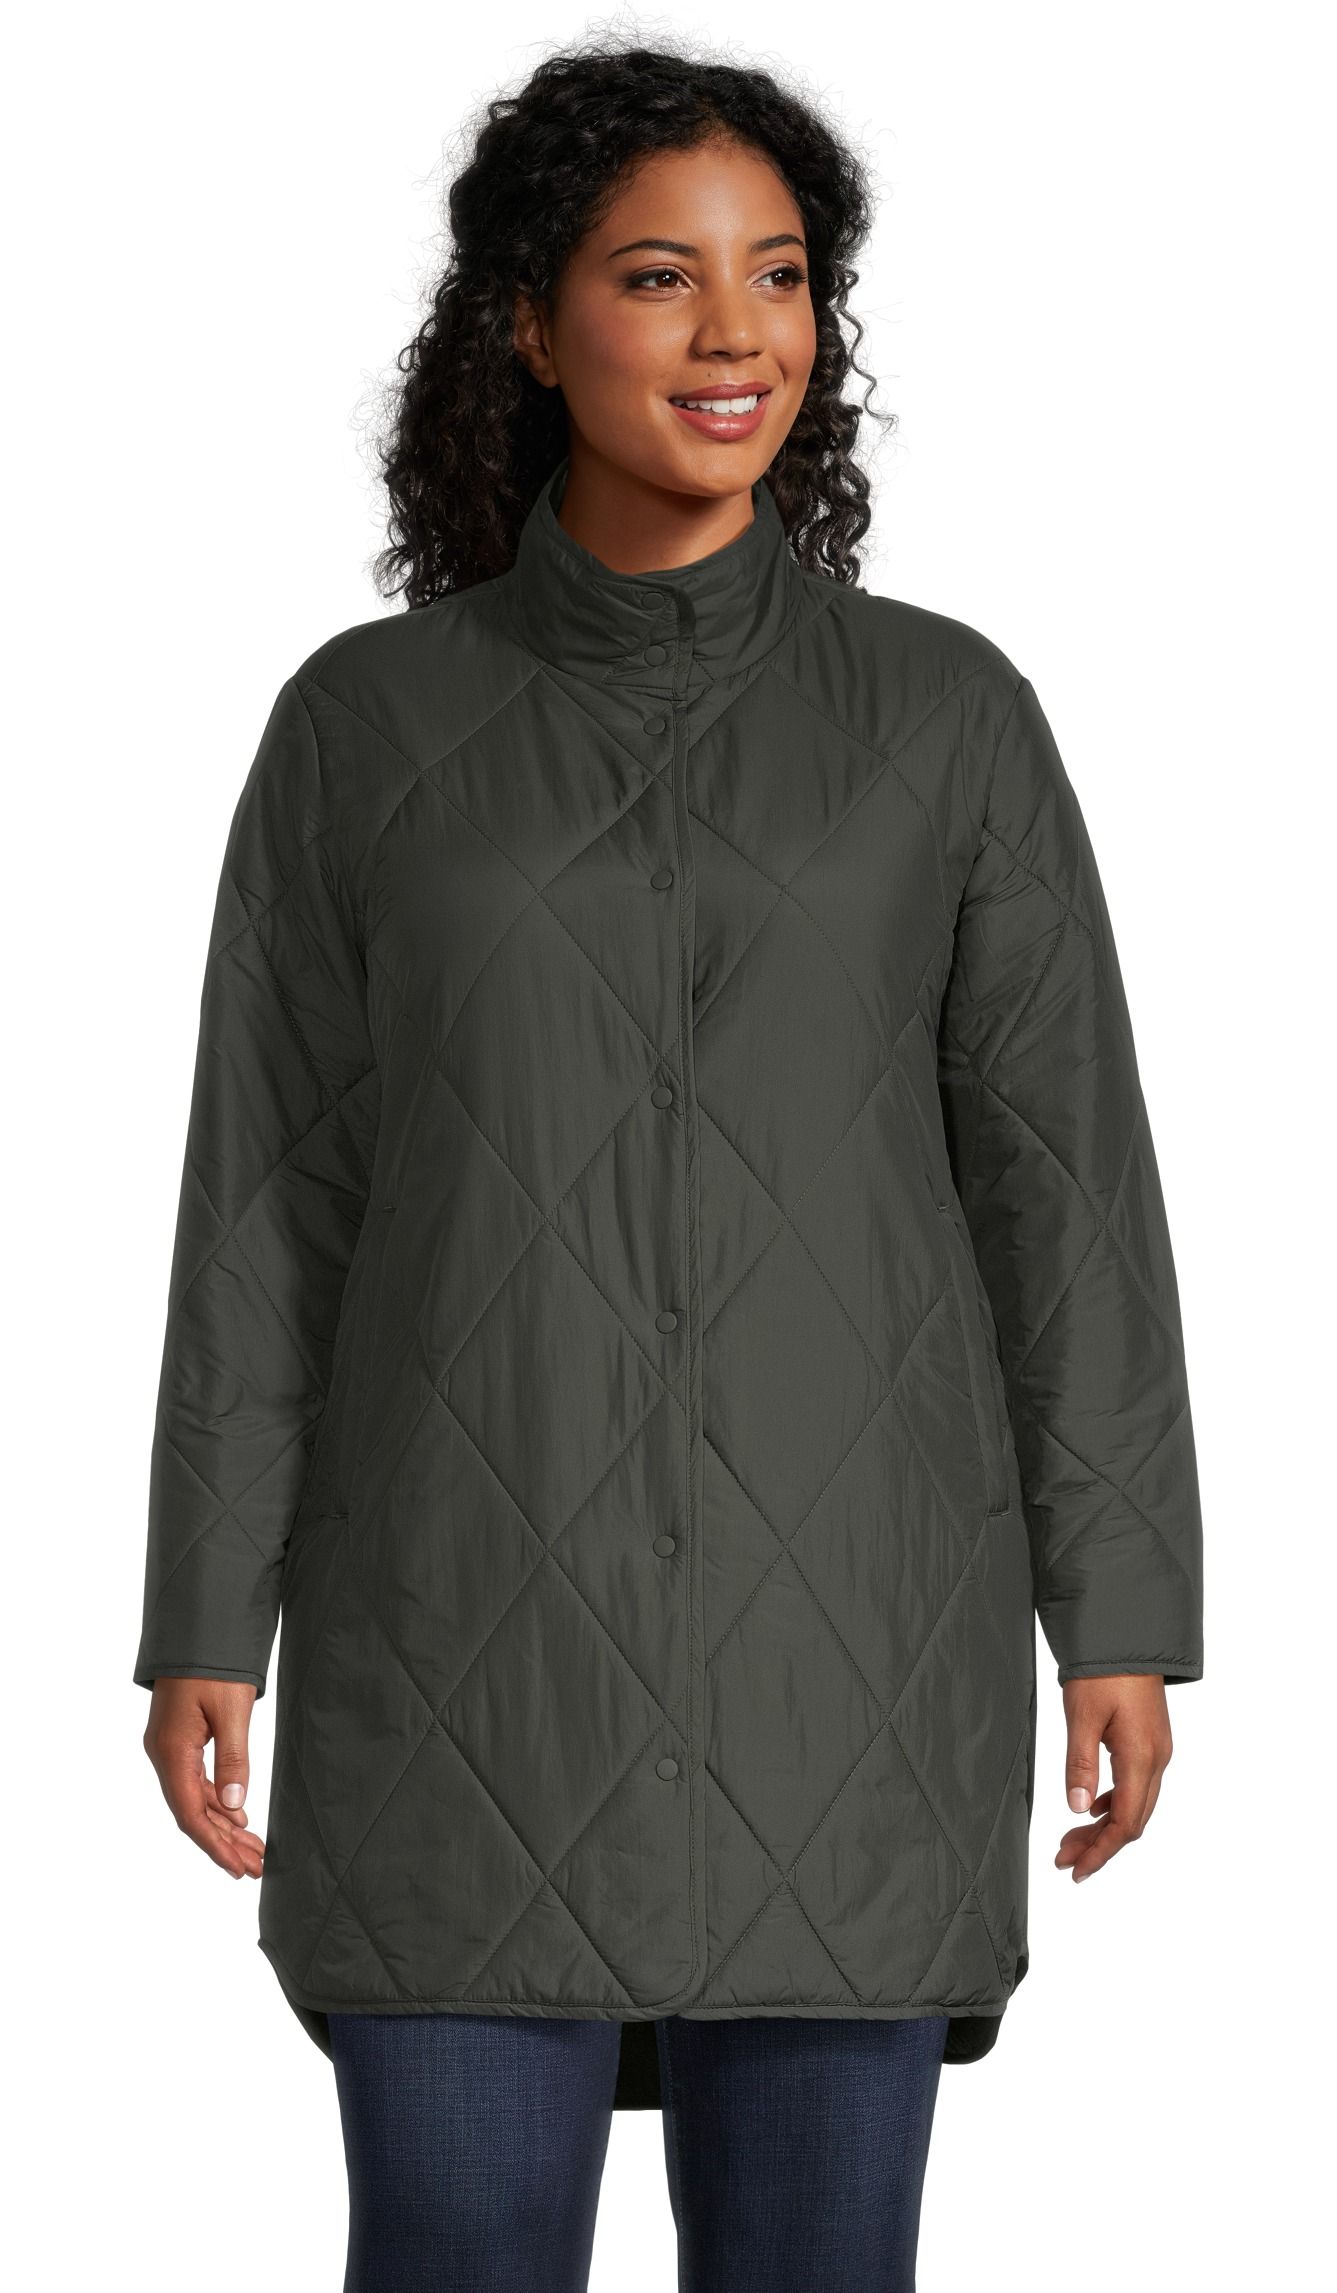 https://media-www.marks.com/product/marks-work-wearhouse/ladies-world/ladies-outerwear/410036348074/dh-quilted-long-jacket-6ed1e416-8fdc-4b13-a24f-0781b89a8593-jpgrendition.jpg